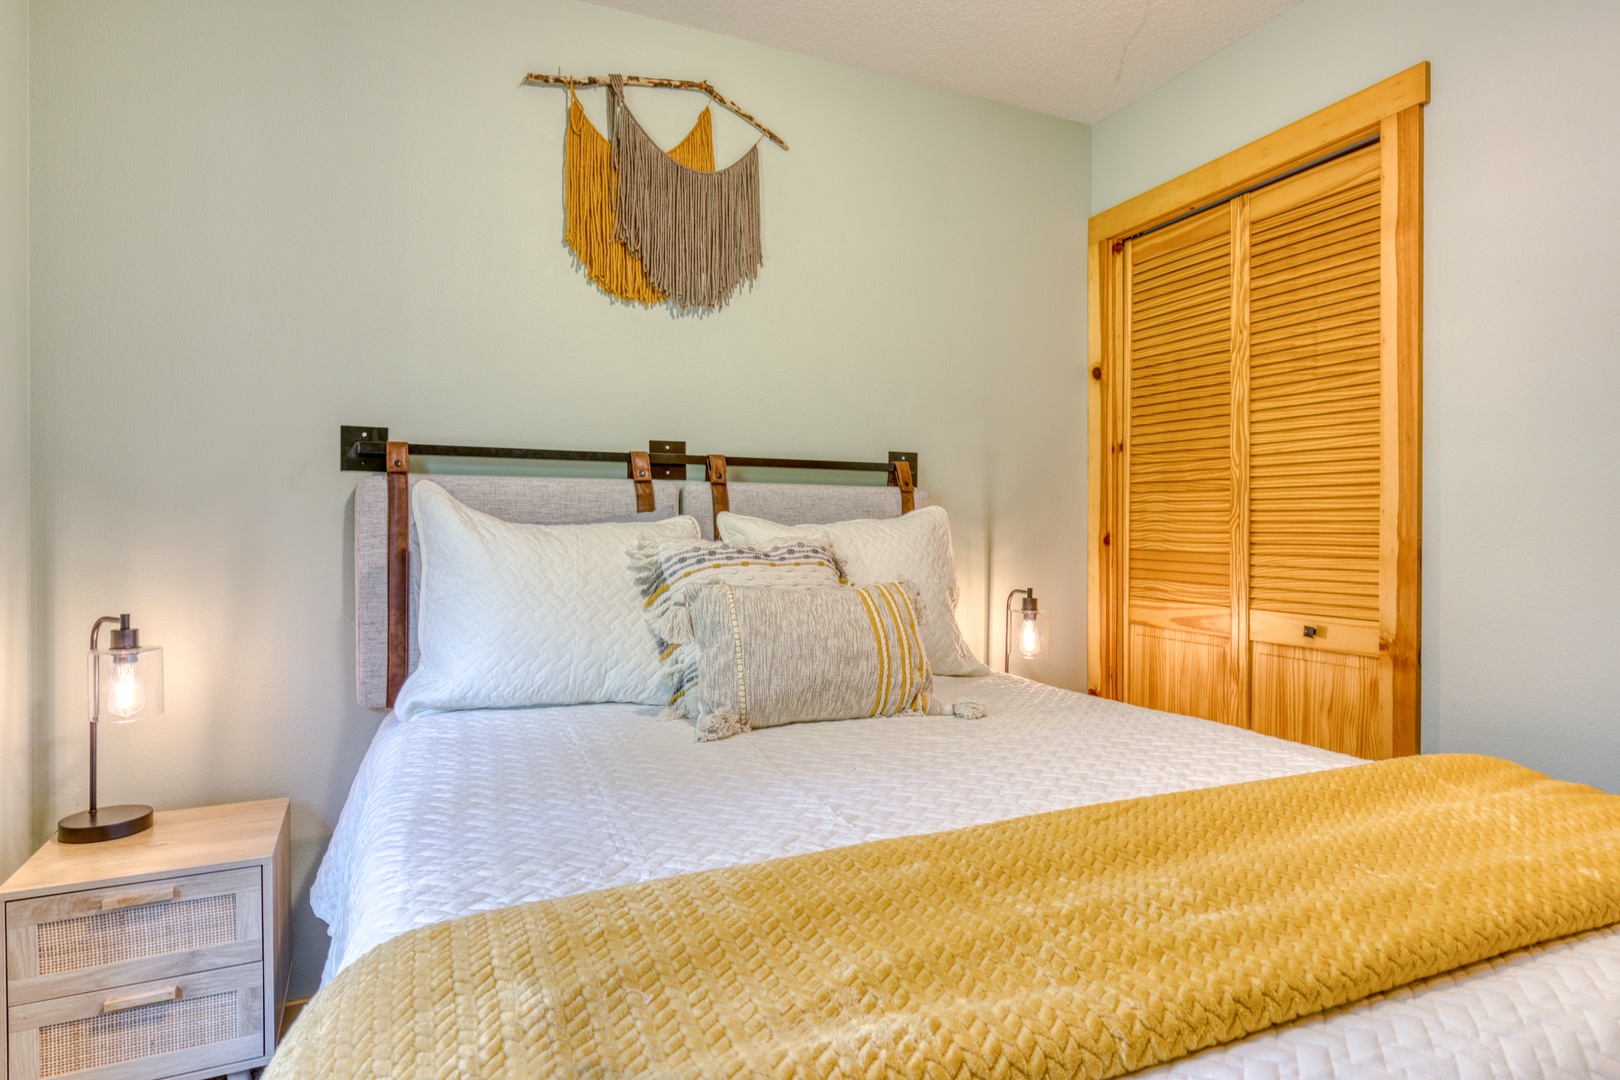 Brightwood Vacation Rentals, Riverside Retreat - There's also a full-size closet in this bedroom